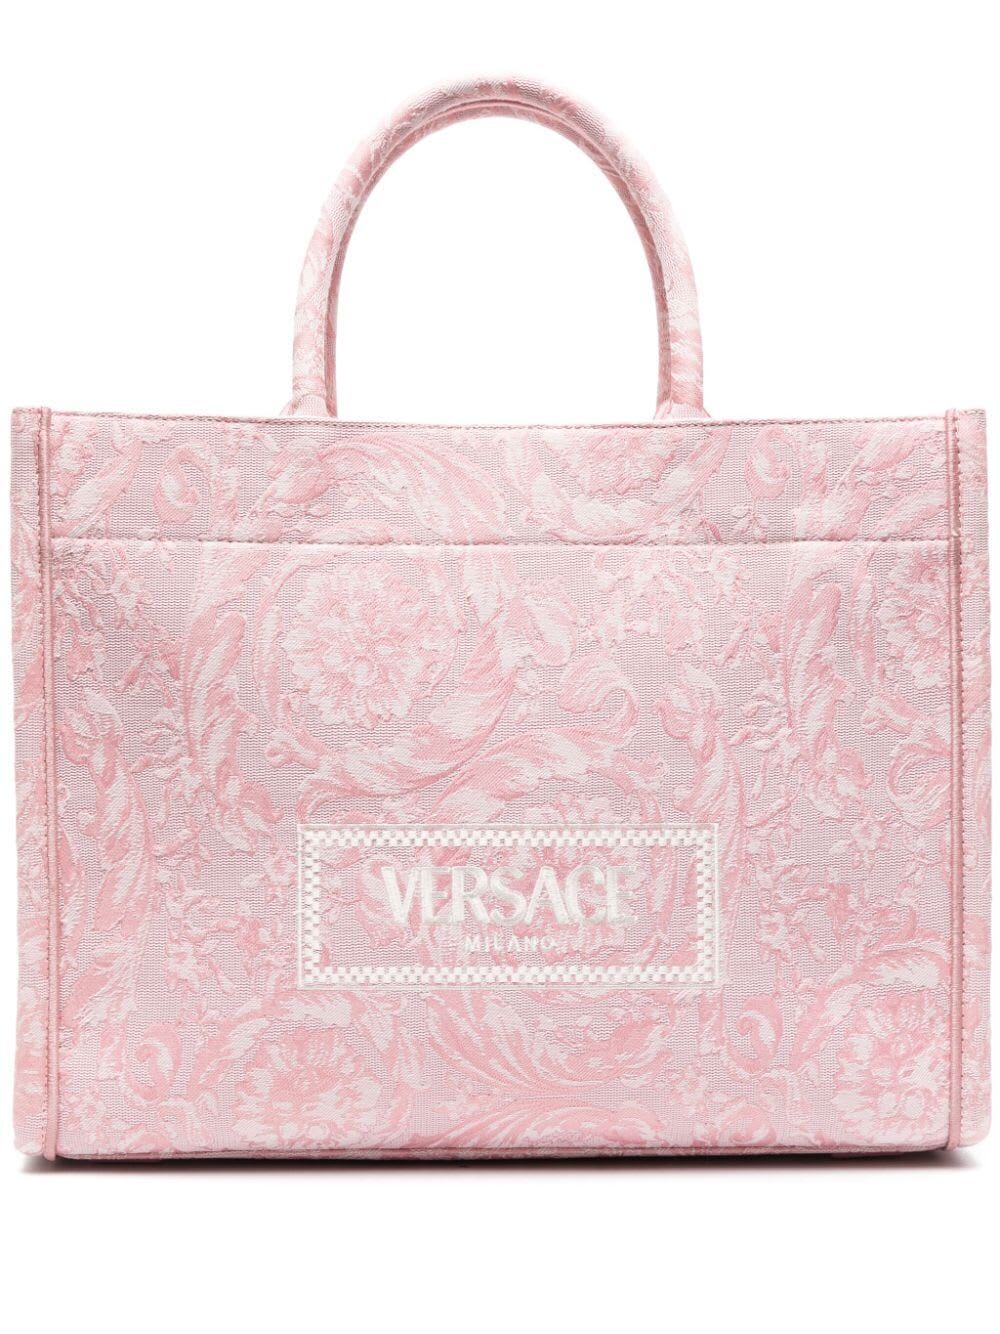 Versace Large Tote Embroidery Jacquard In V Pale Pink English Rose  Gold